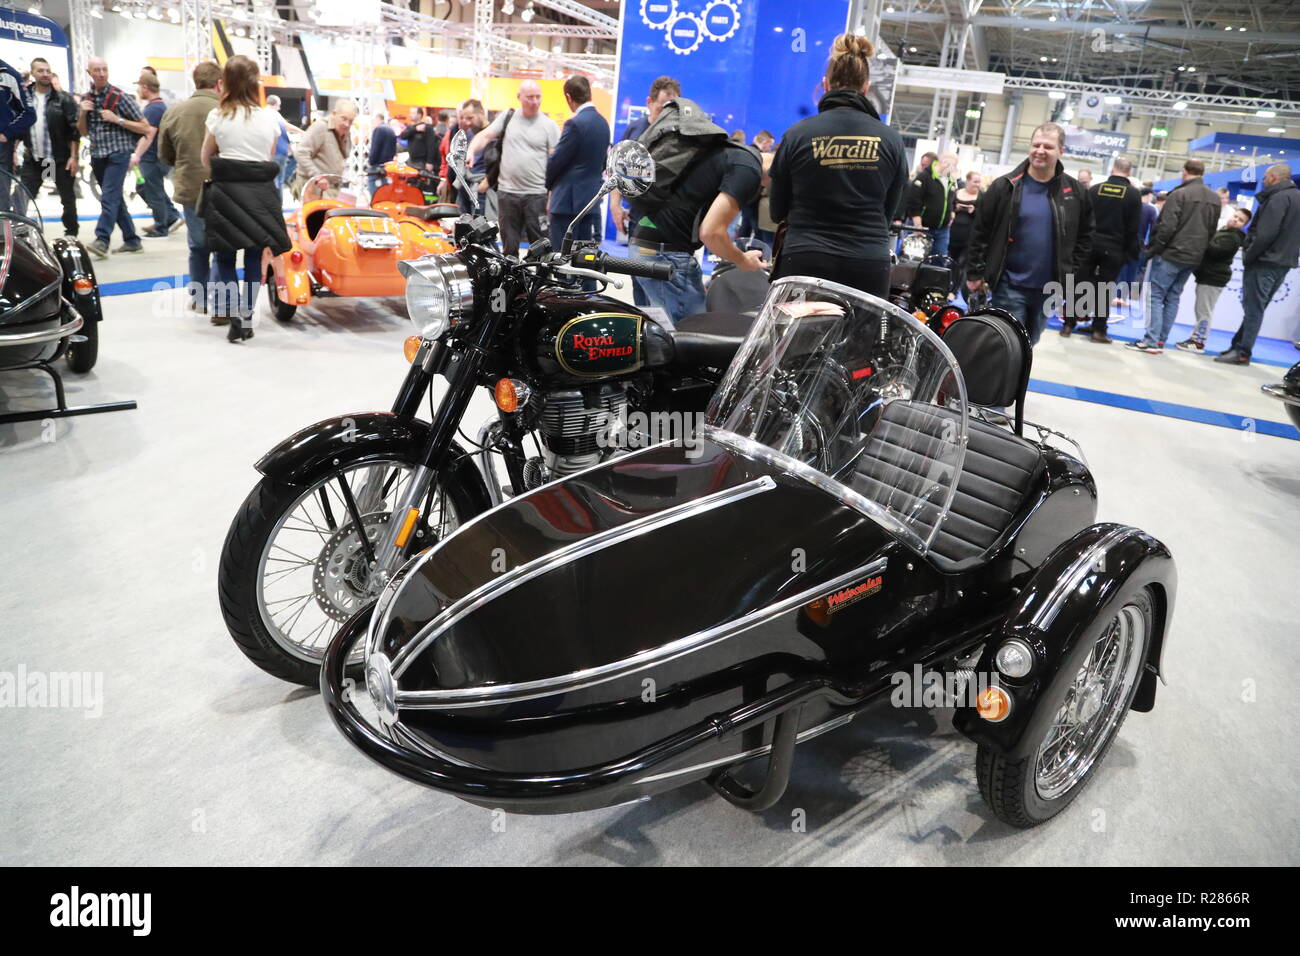 Birmingham, UK. 17th November 2018. This year's largest motorbike show in the UK is taking place at the NEC from the 17th to the 25th of November. Motorbike enthusiasts gather to admire the latest products of the industry. Credit: Uwe Deffner/Alamy Live News Stock Photo